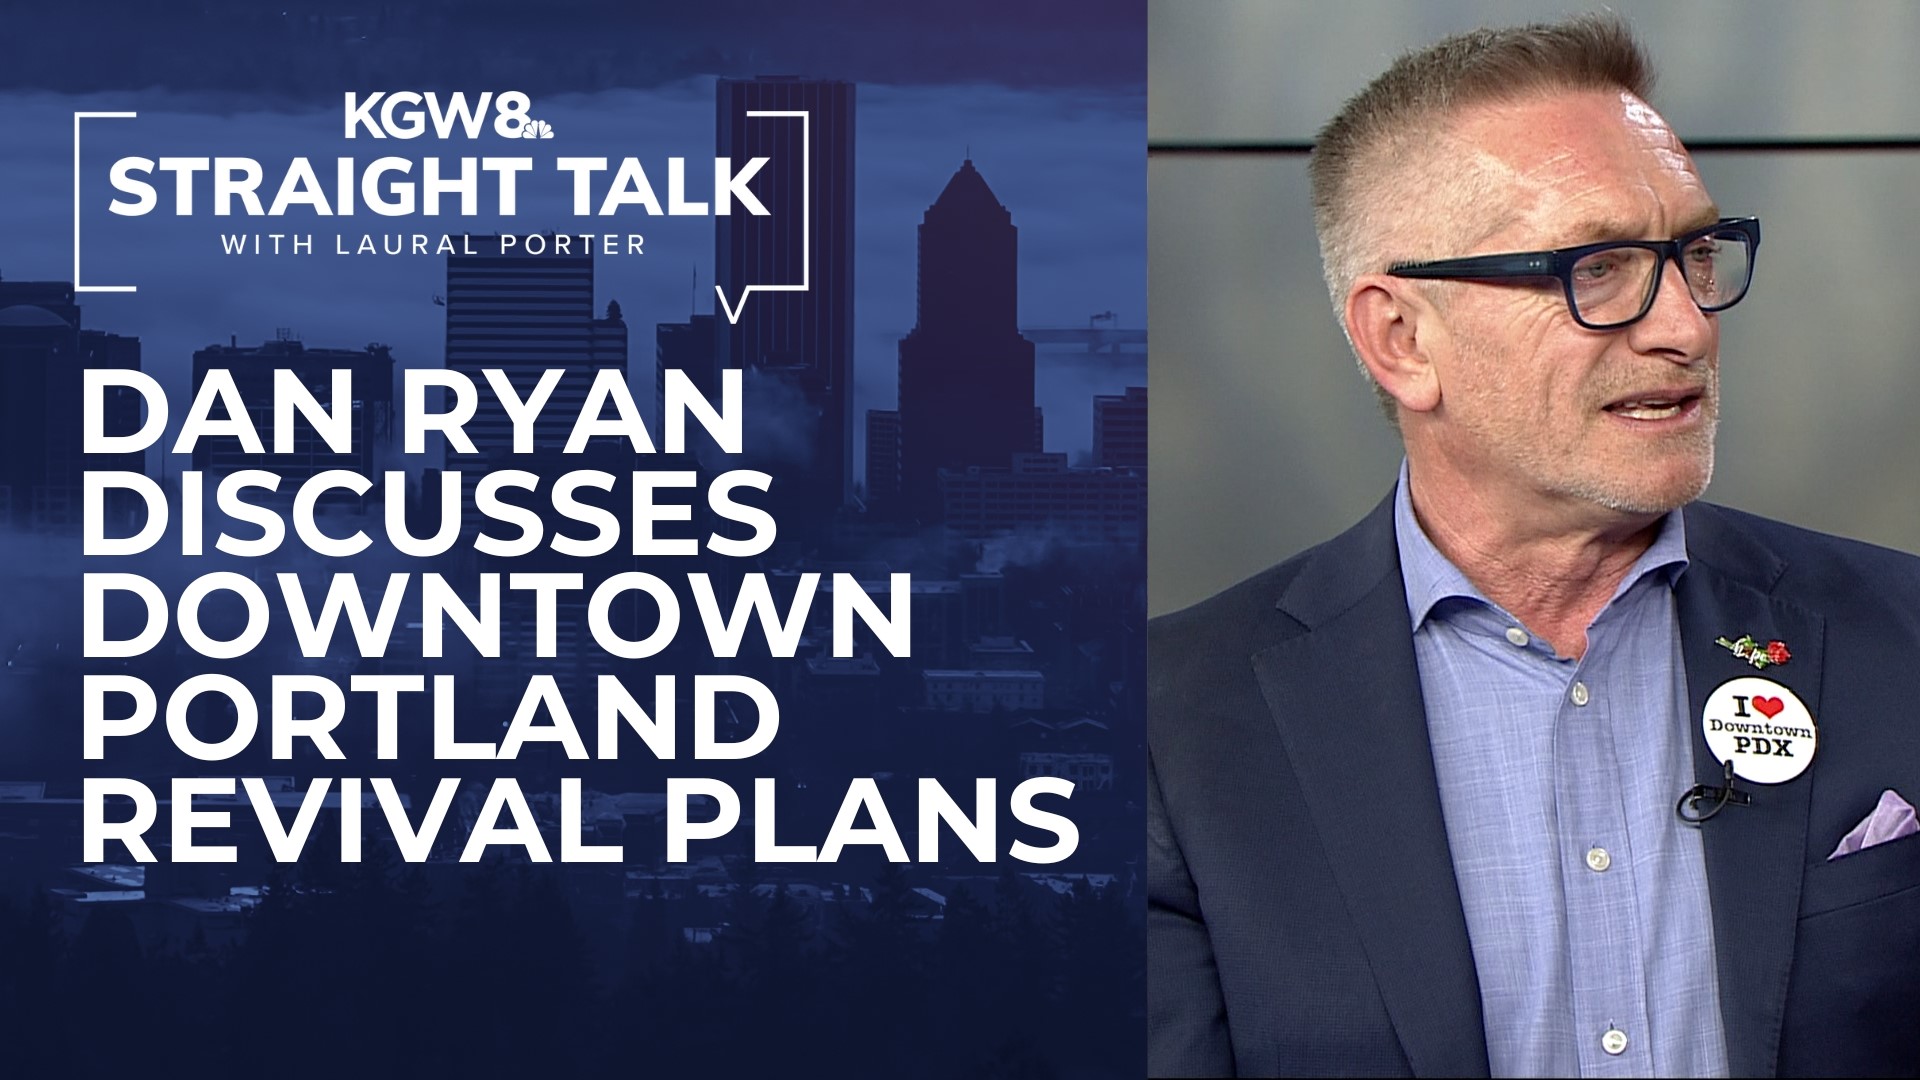 Ryan discussed the city's approach to providing housing for homeless residents, as well as Portland's upcoming transition to a new form of government.